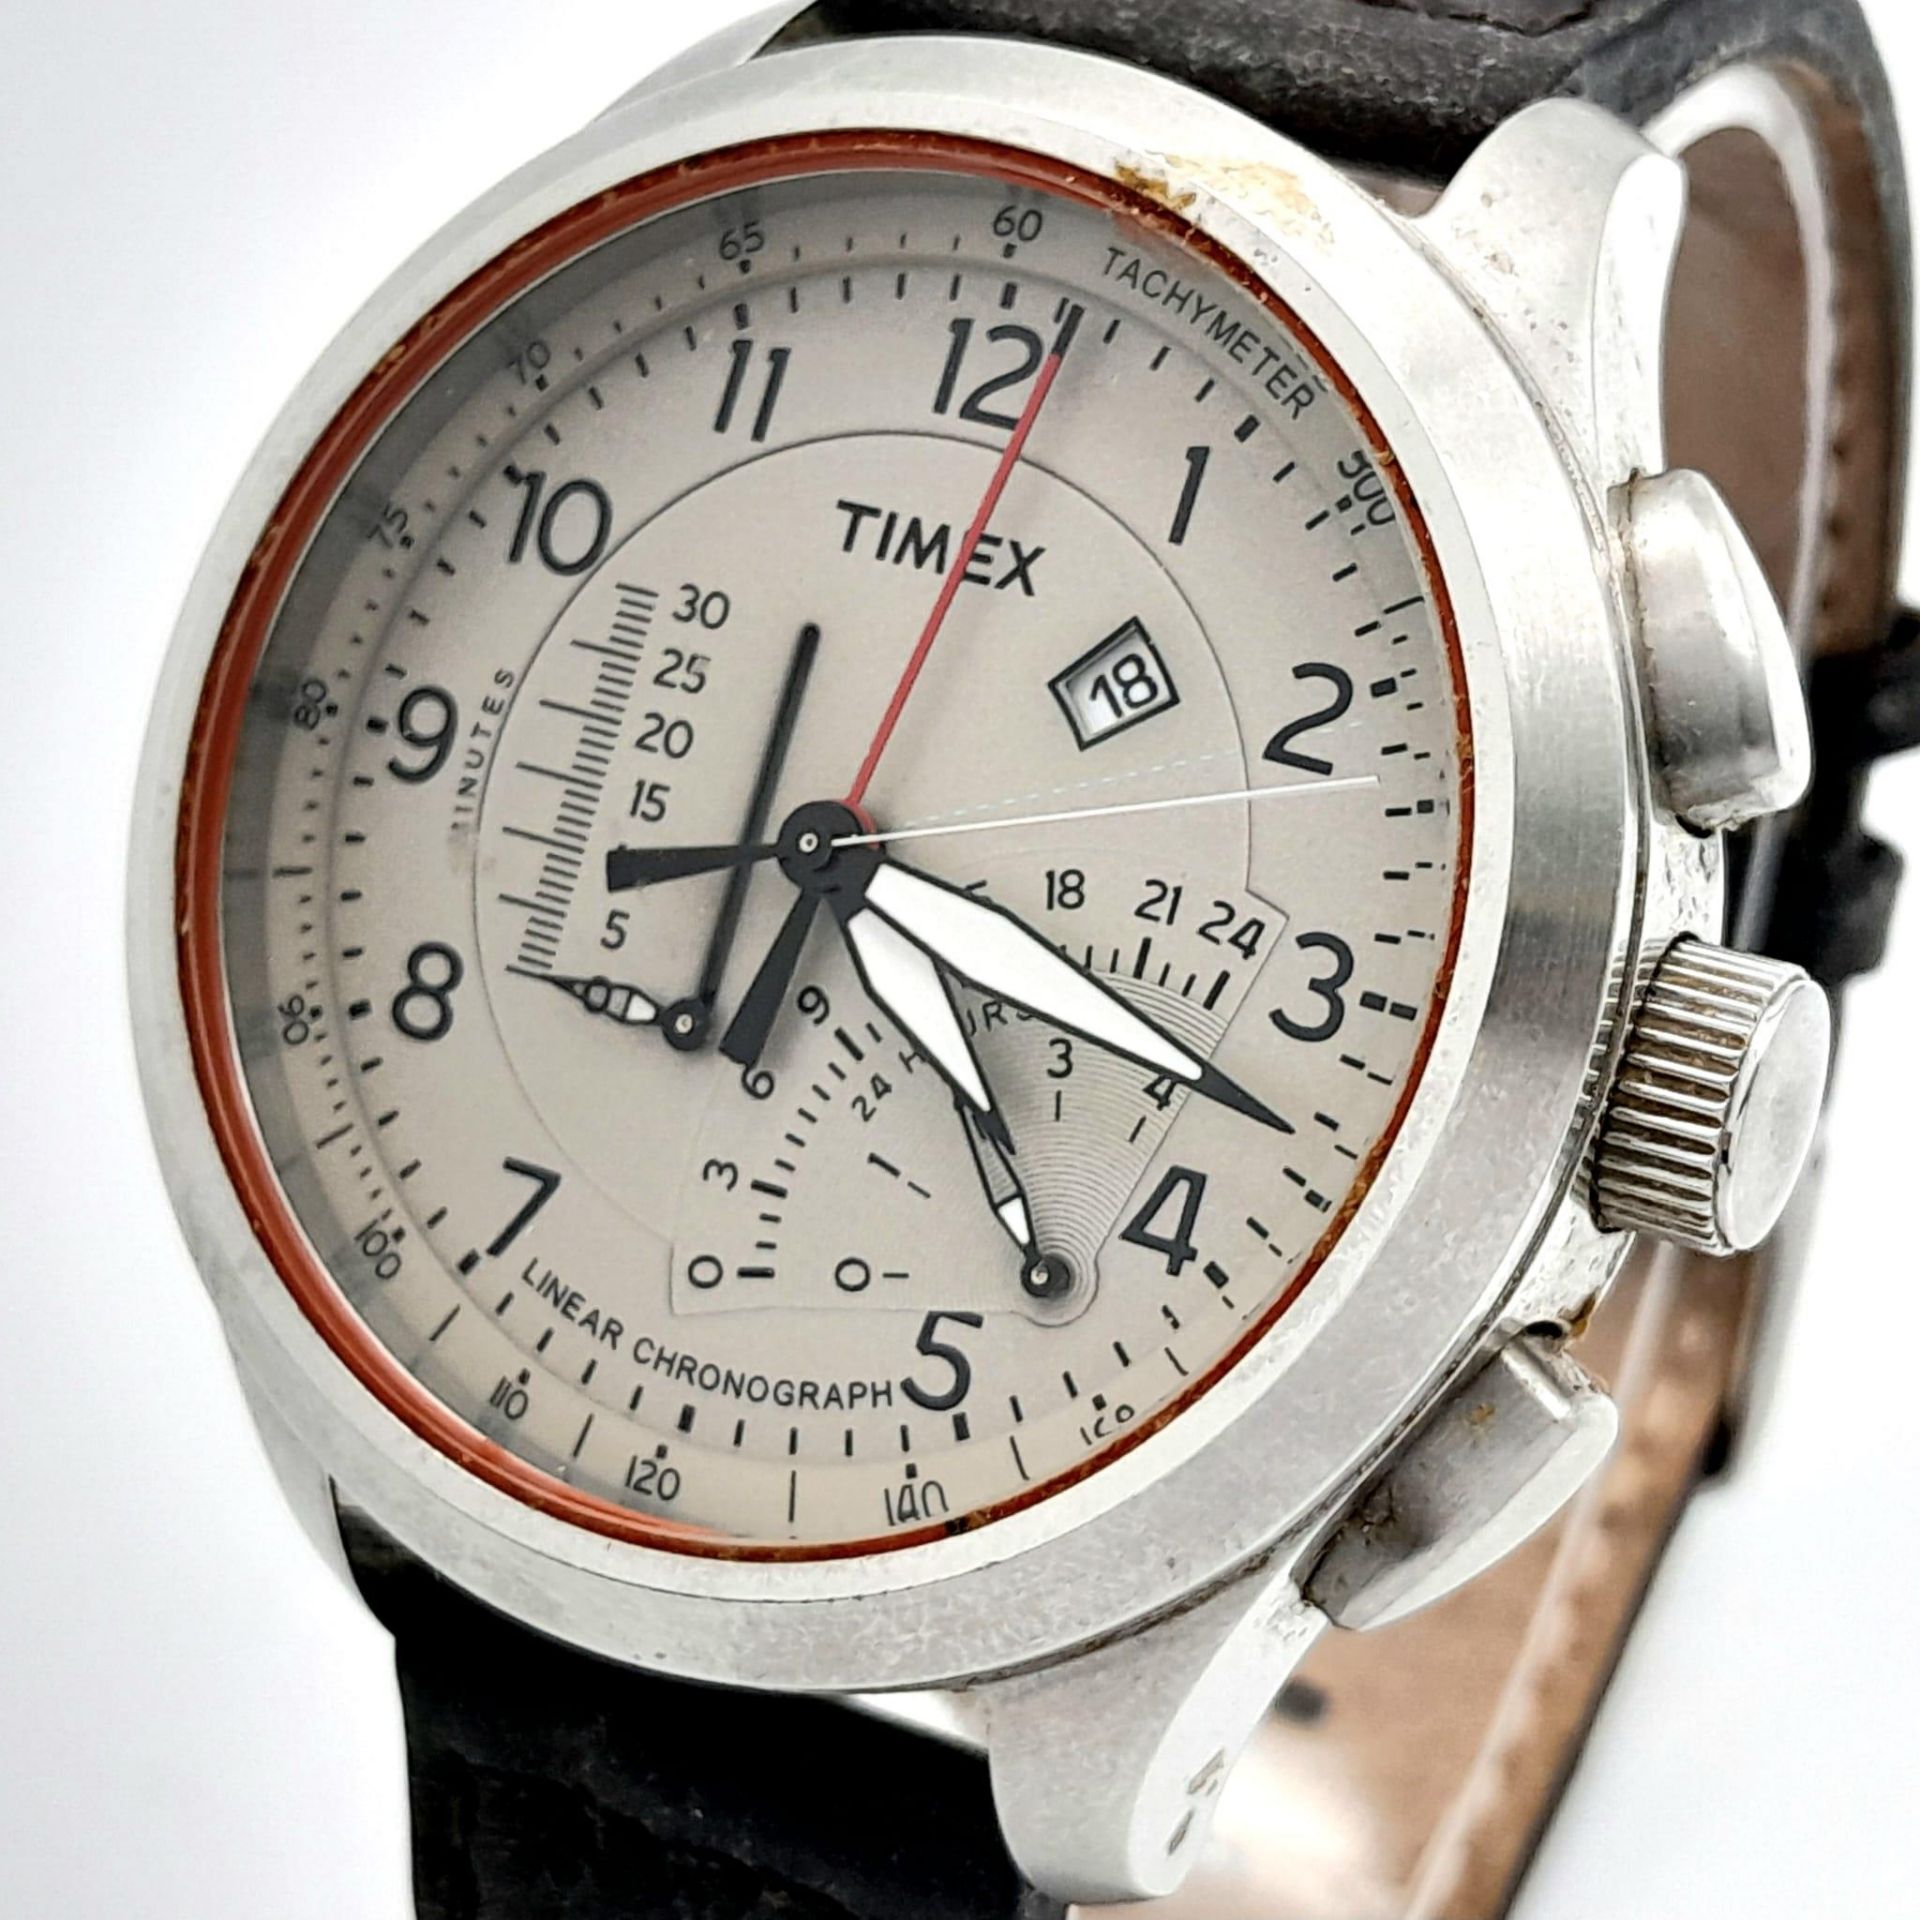 A Timex Intelligent Chronograph Quartz Gents Watch. Brown leather strap. Stainless steel case - - Image 2 of 6